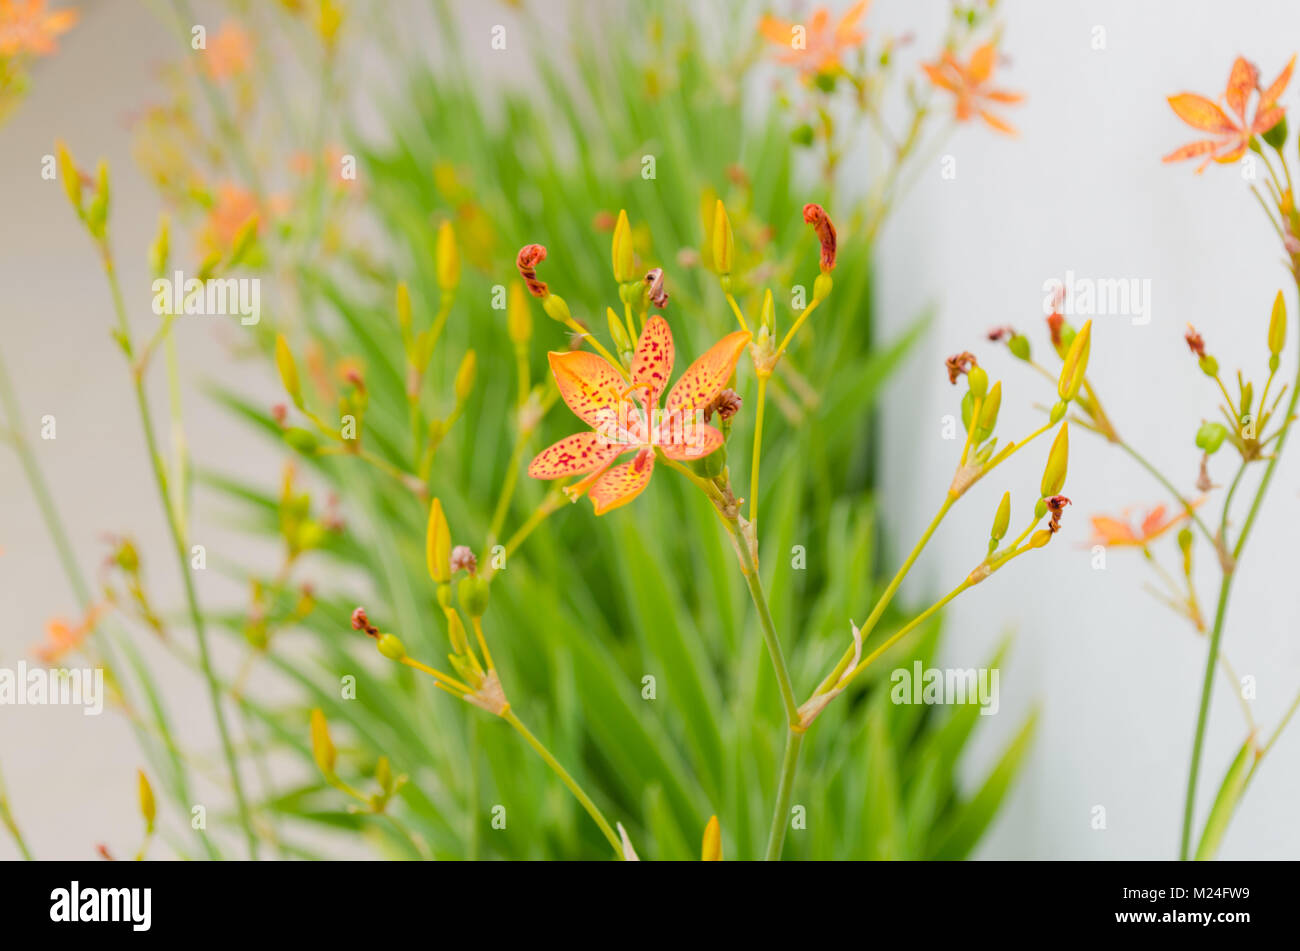 little flower of leopard lily with in a green background and beautiful orange colors Stock Photo